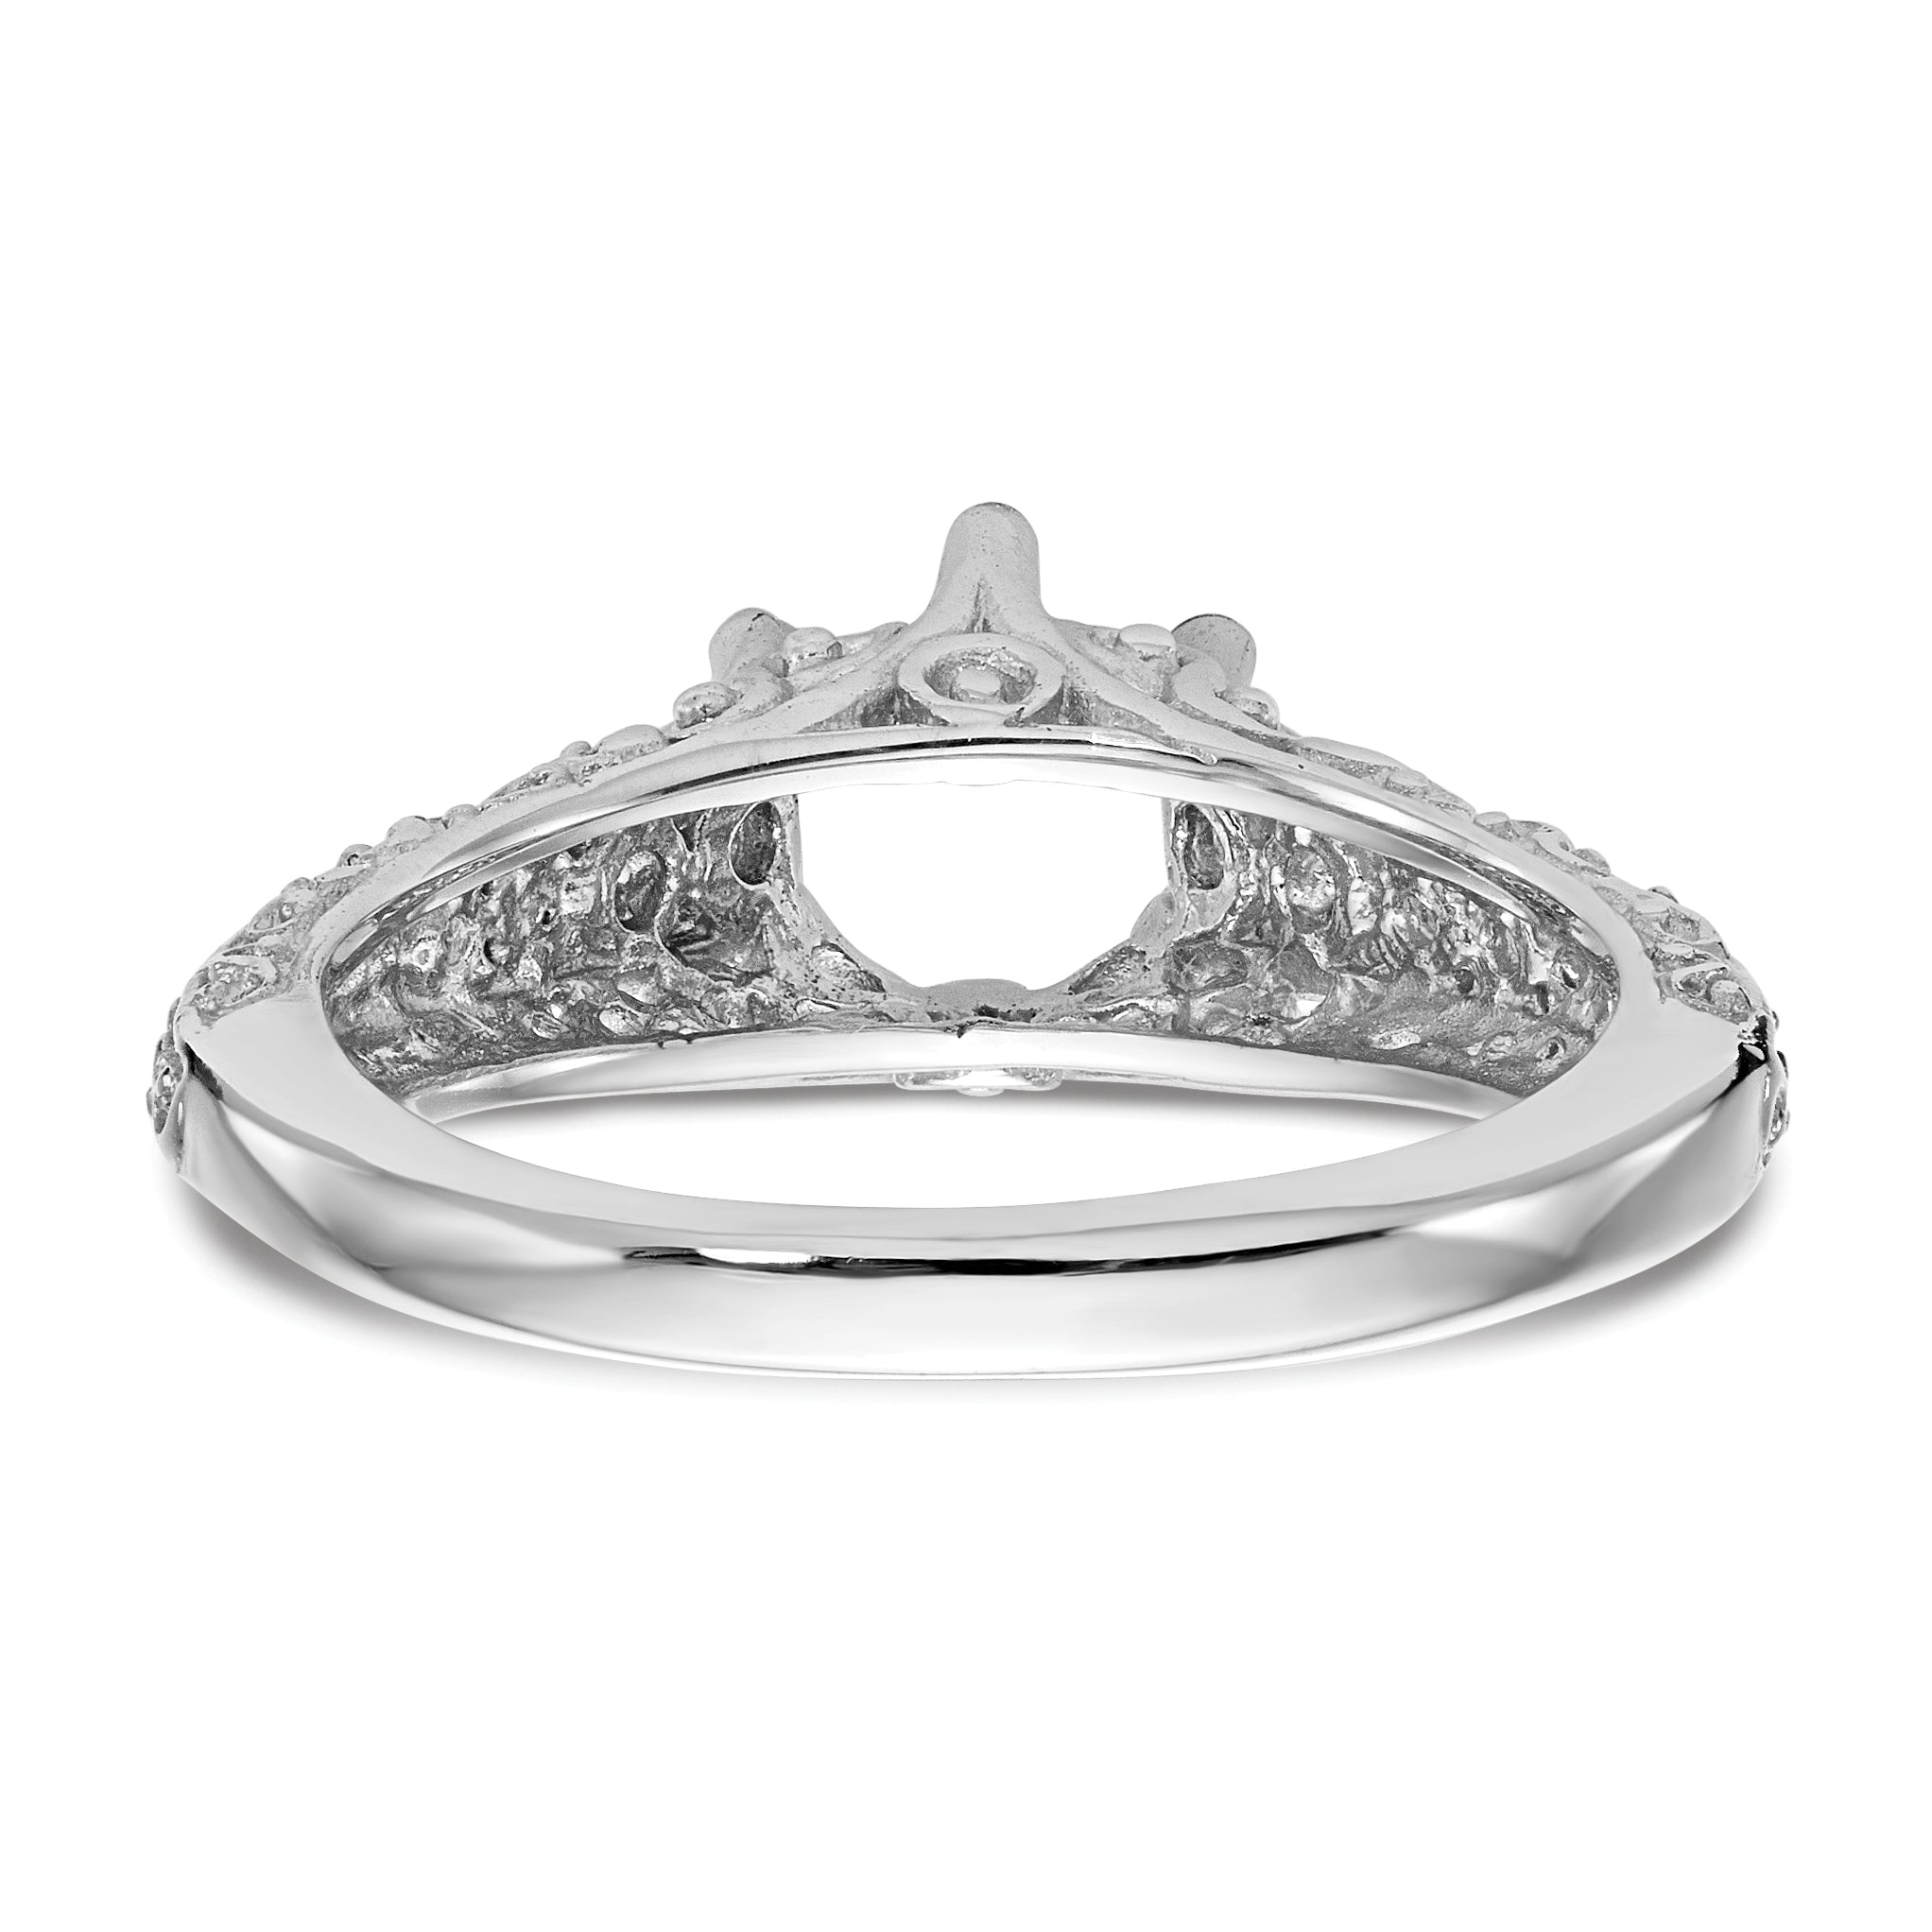 14K White Gold 1 carat (6.50 mm) 6-Prong Vintage Round Solitaire Engagement Ring Mounting